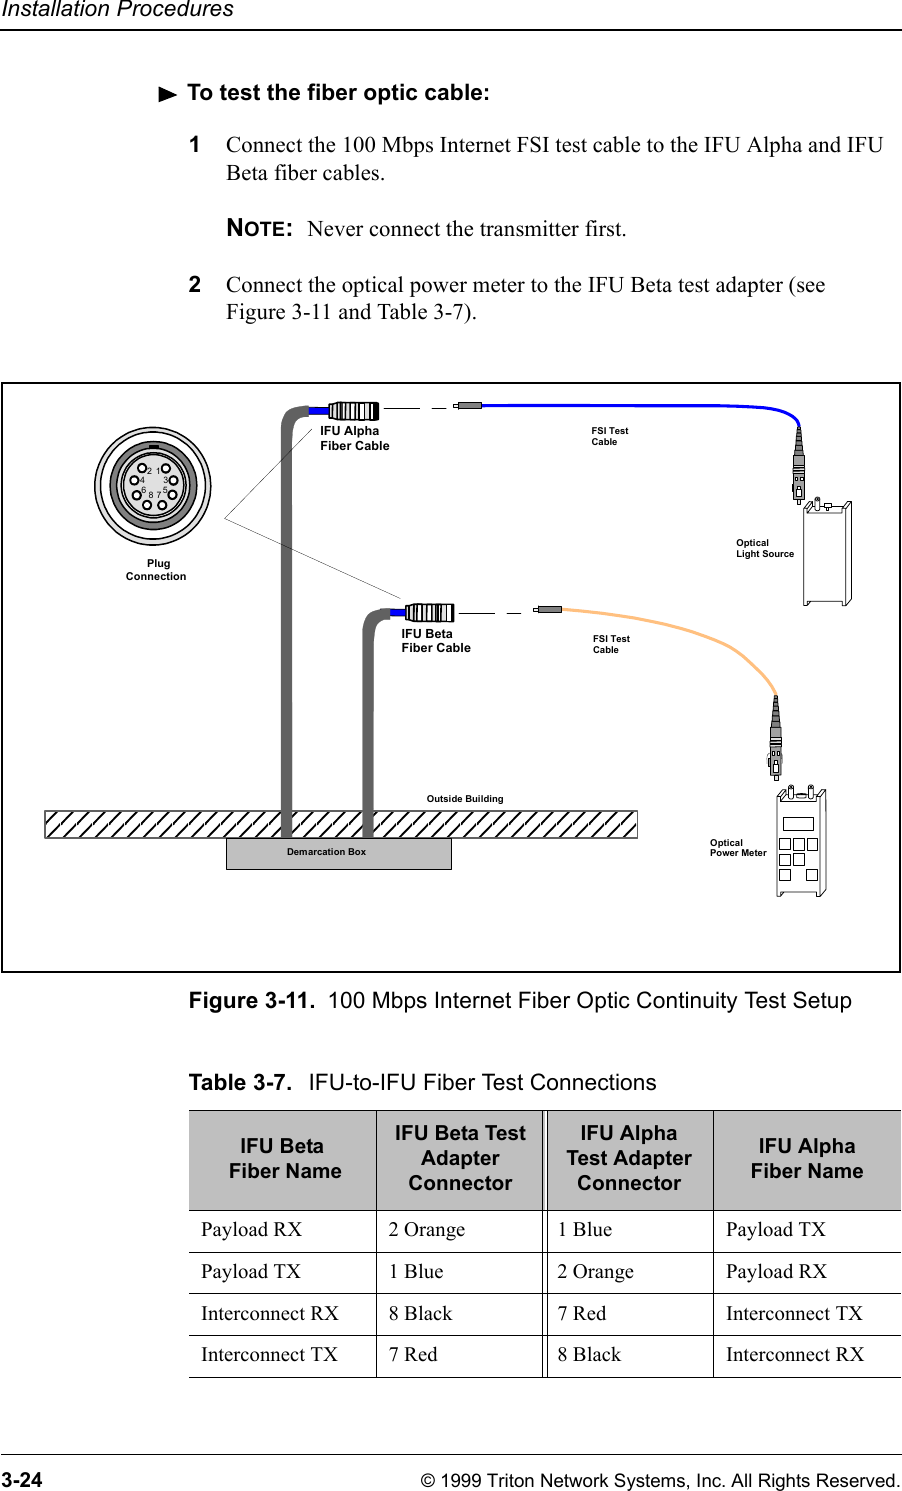 Installation Procedures3-24 © 1999 Triton Network Systems, Inc. All Rights Reserved.To test the fiber optic cable:1Connect the 100 Mbps Internet FSI test cable to the IFU Alpha and IFU Beta fiber cables. NOTE:  Never connect the transmitter first.2Connect the optical power meter to the IFU Beta test adapter (see Figure 3-11 and Table 3-7).Figure 3-11. 100 Mbps Internet Fiber Optic Continuity Test SetupOutside BuildingINSIDE BUILDINGOpticalLight SourceDemarcation BoxIFU AlphaFiber CableIFU BetaFiber CableOptical Power Meter       PlugConnection12436578FSI TestCableFSI TestCableTable 3-7. IFU-to-IFU Fiber Test ConnectionsIFU Beta Fiber NameIFU Beta Test Adapter ConnectorIFU AlphaTest Adapter ConnectorIFU AlphaFiber NamePayload RX 2 Orange 1 Blue Payload TXPayload TX 1 Blue 2 Orange Payload RXInterconnect RX 8 Black 7 Red Interconnect TXInterconnect TX 7 Red 8 Black Interconnect RX